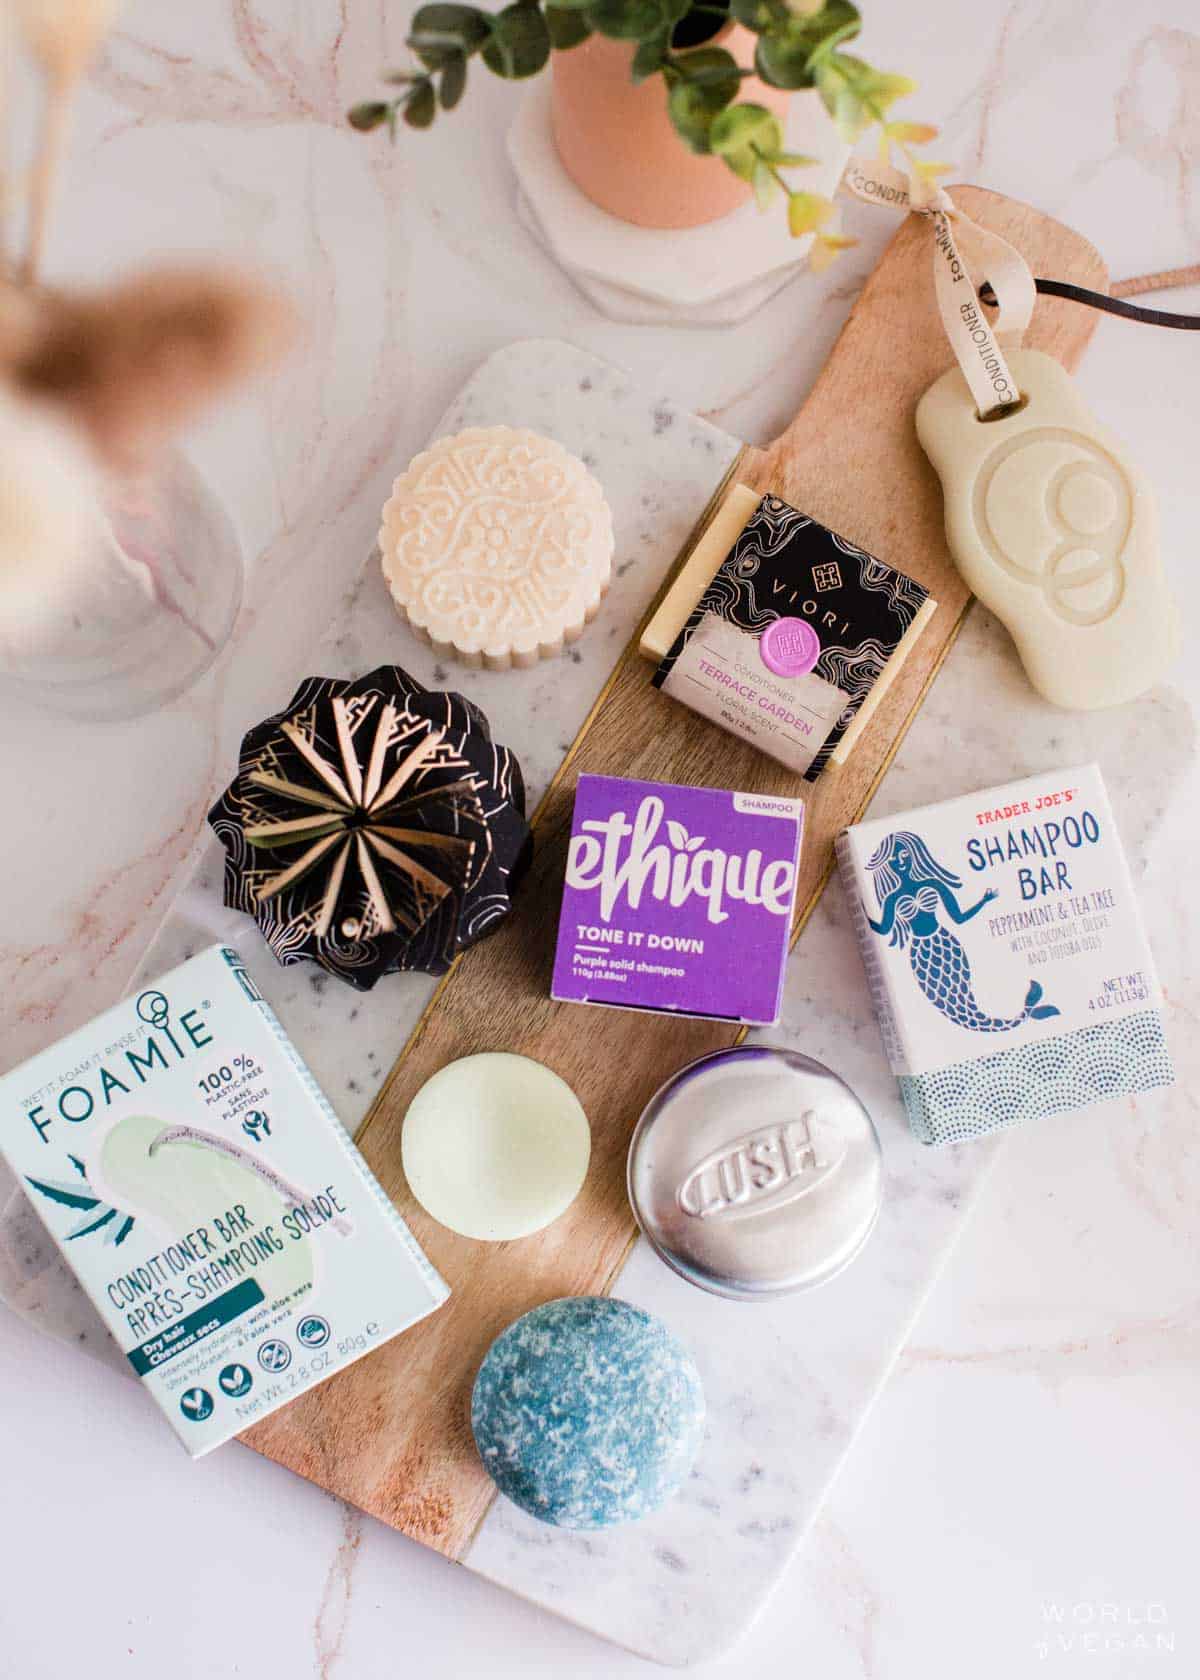 Brands of shampoo bars including Ethique, LUSH, Unwrapped Life, Viori, Trader Joe's, and Foamie. 